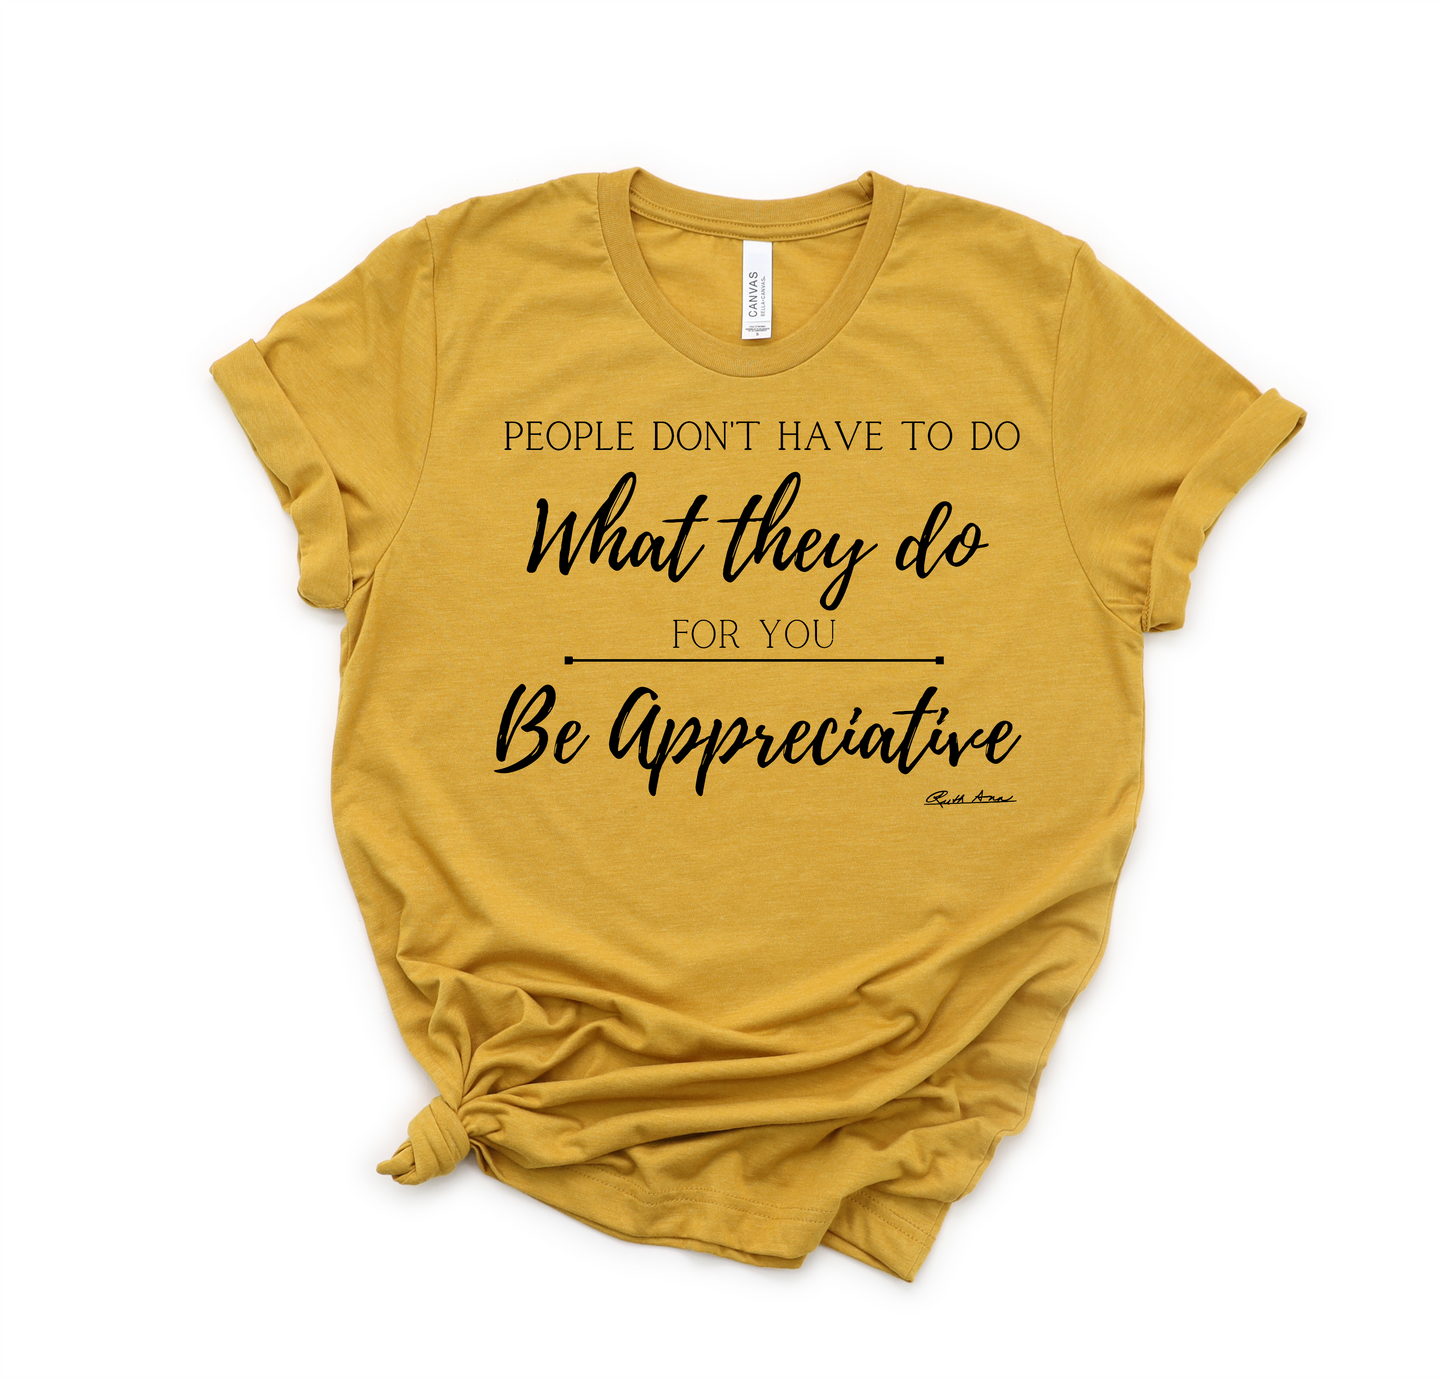 "MAMA SAID" - PEOPLE DON'T HAVE TO DO WHAT THEY DO FOR YOU...BE APPRECIATIVE - DESIGN 1